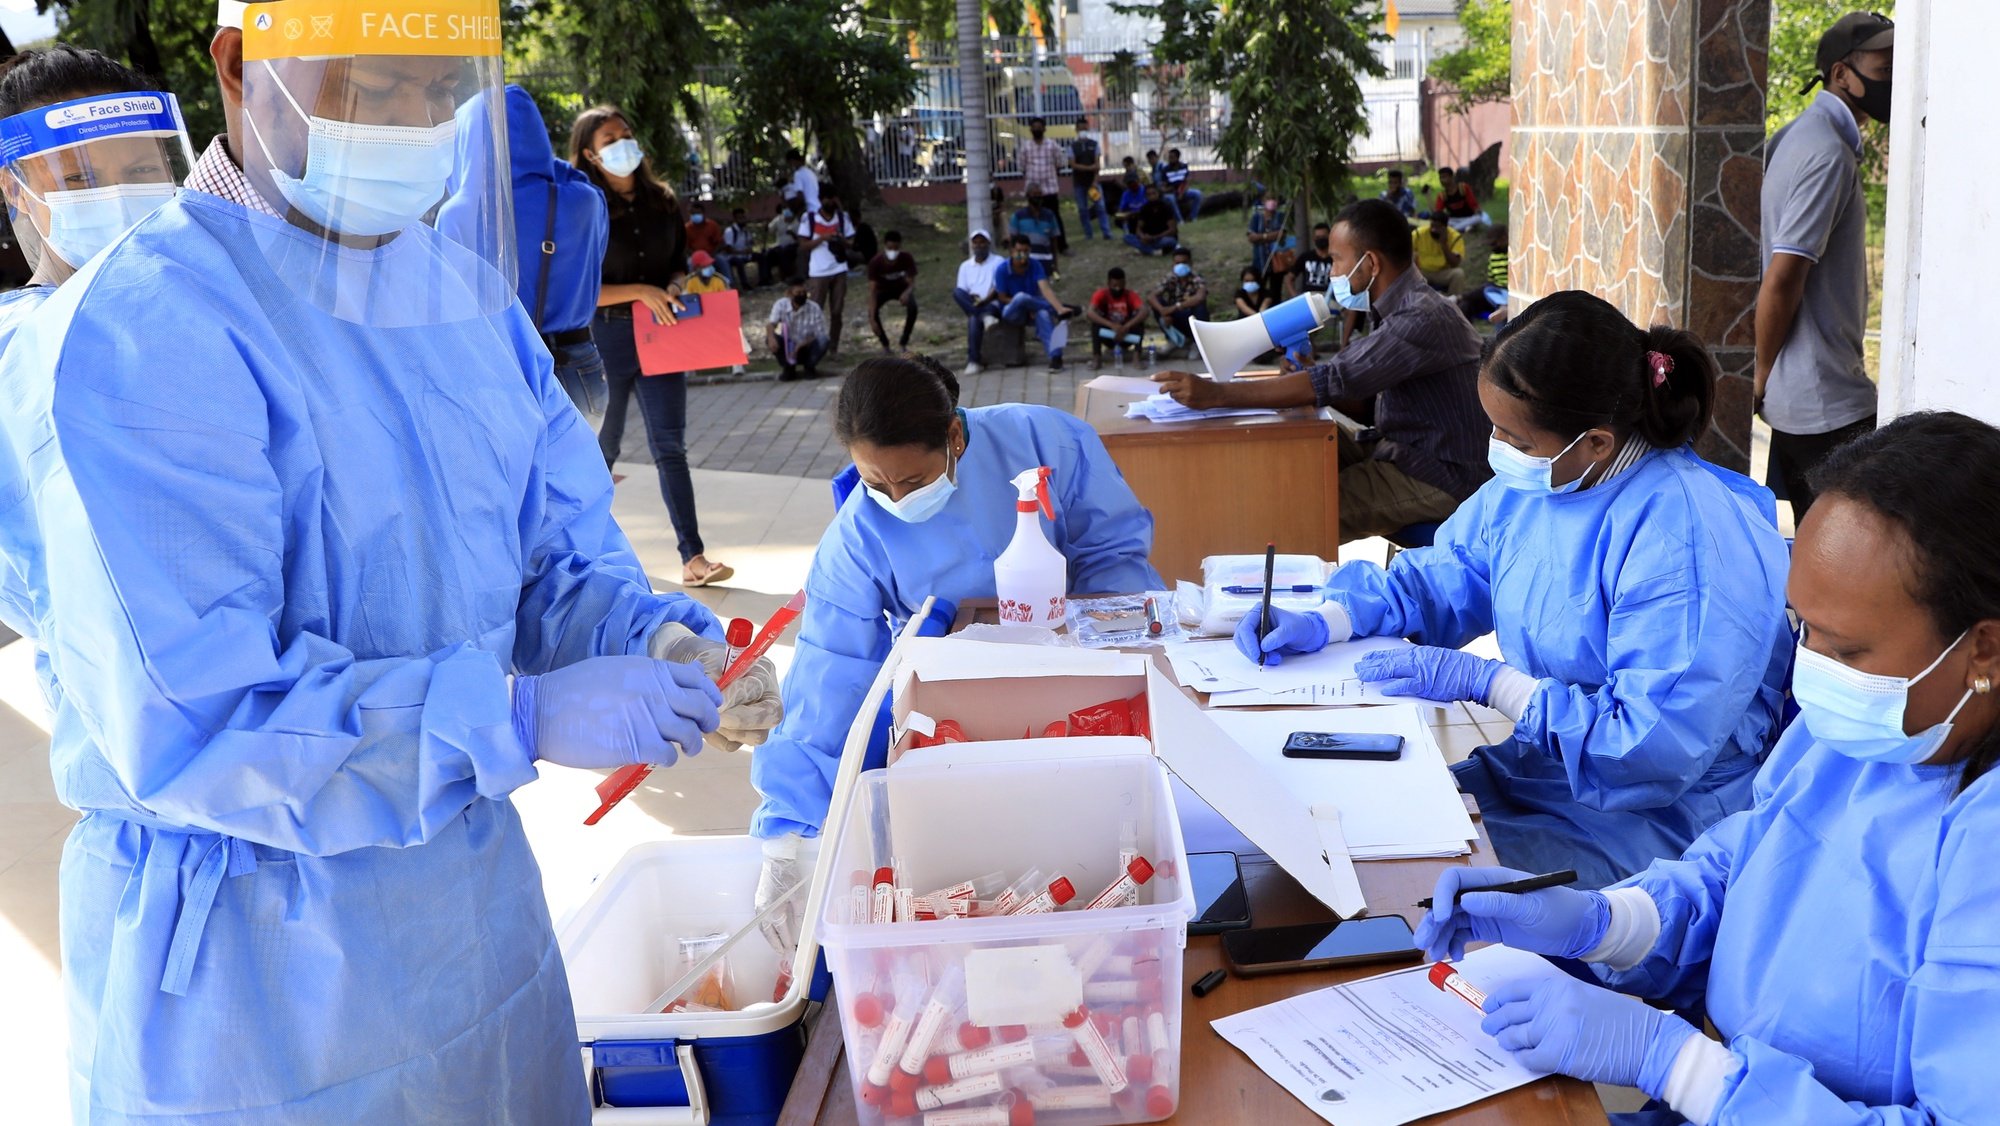 epa09226181 Health workers collect specimen samples during a COVID-19 swab test drive in Dili, East Timor, also known as Timor Leste, 25 May 2021. East Timor has recorded nearly 6,000 COVID-19 cases since the beginning of the pandemic.  EPA/ANTONIO DASIPARU